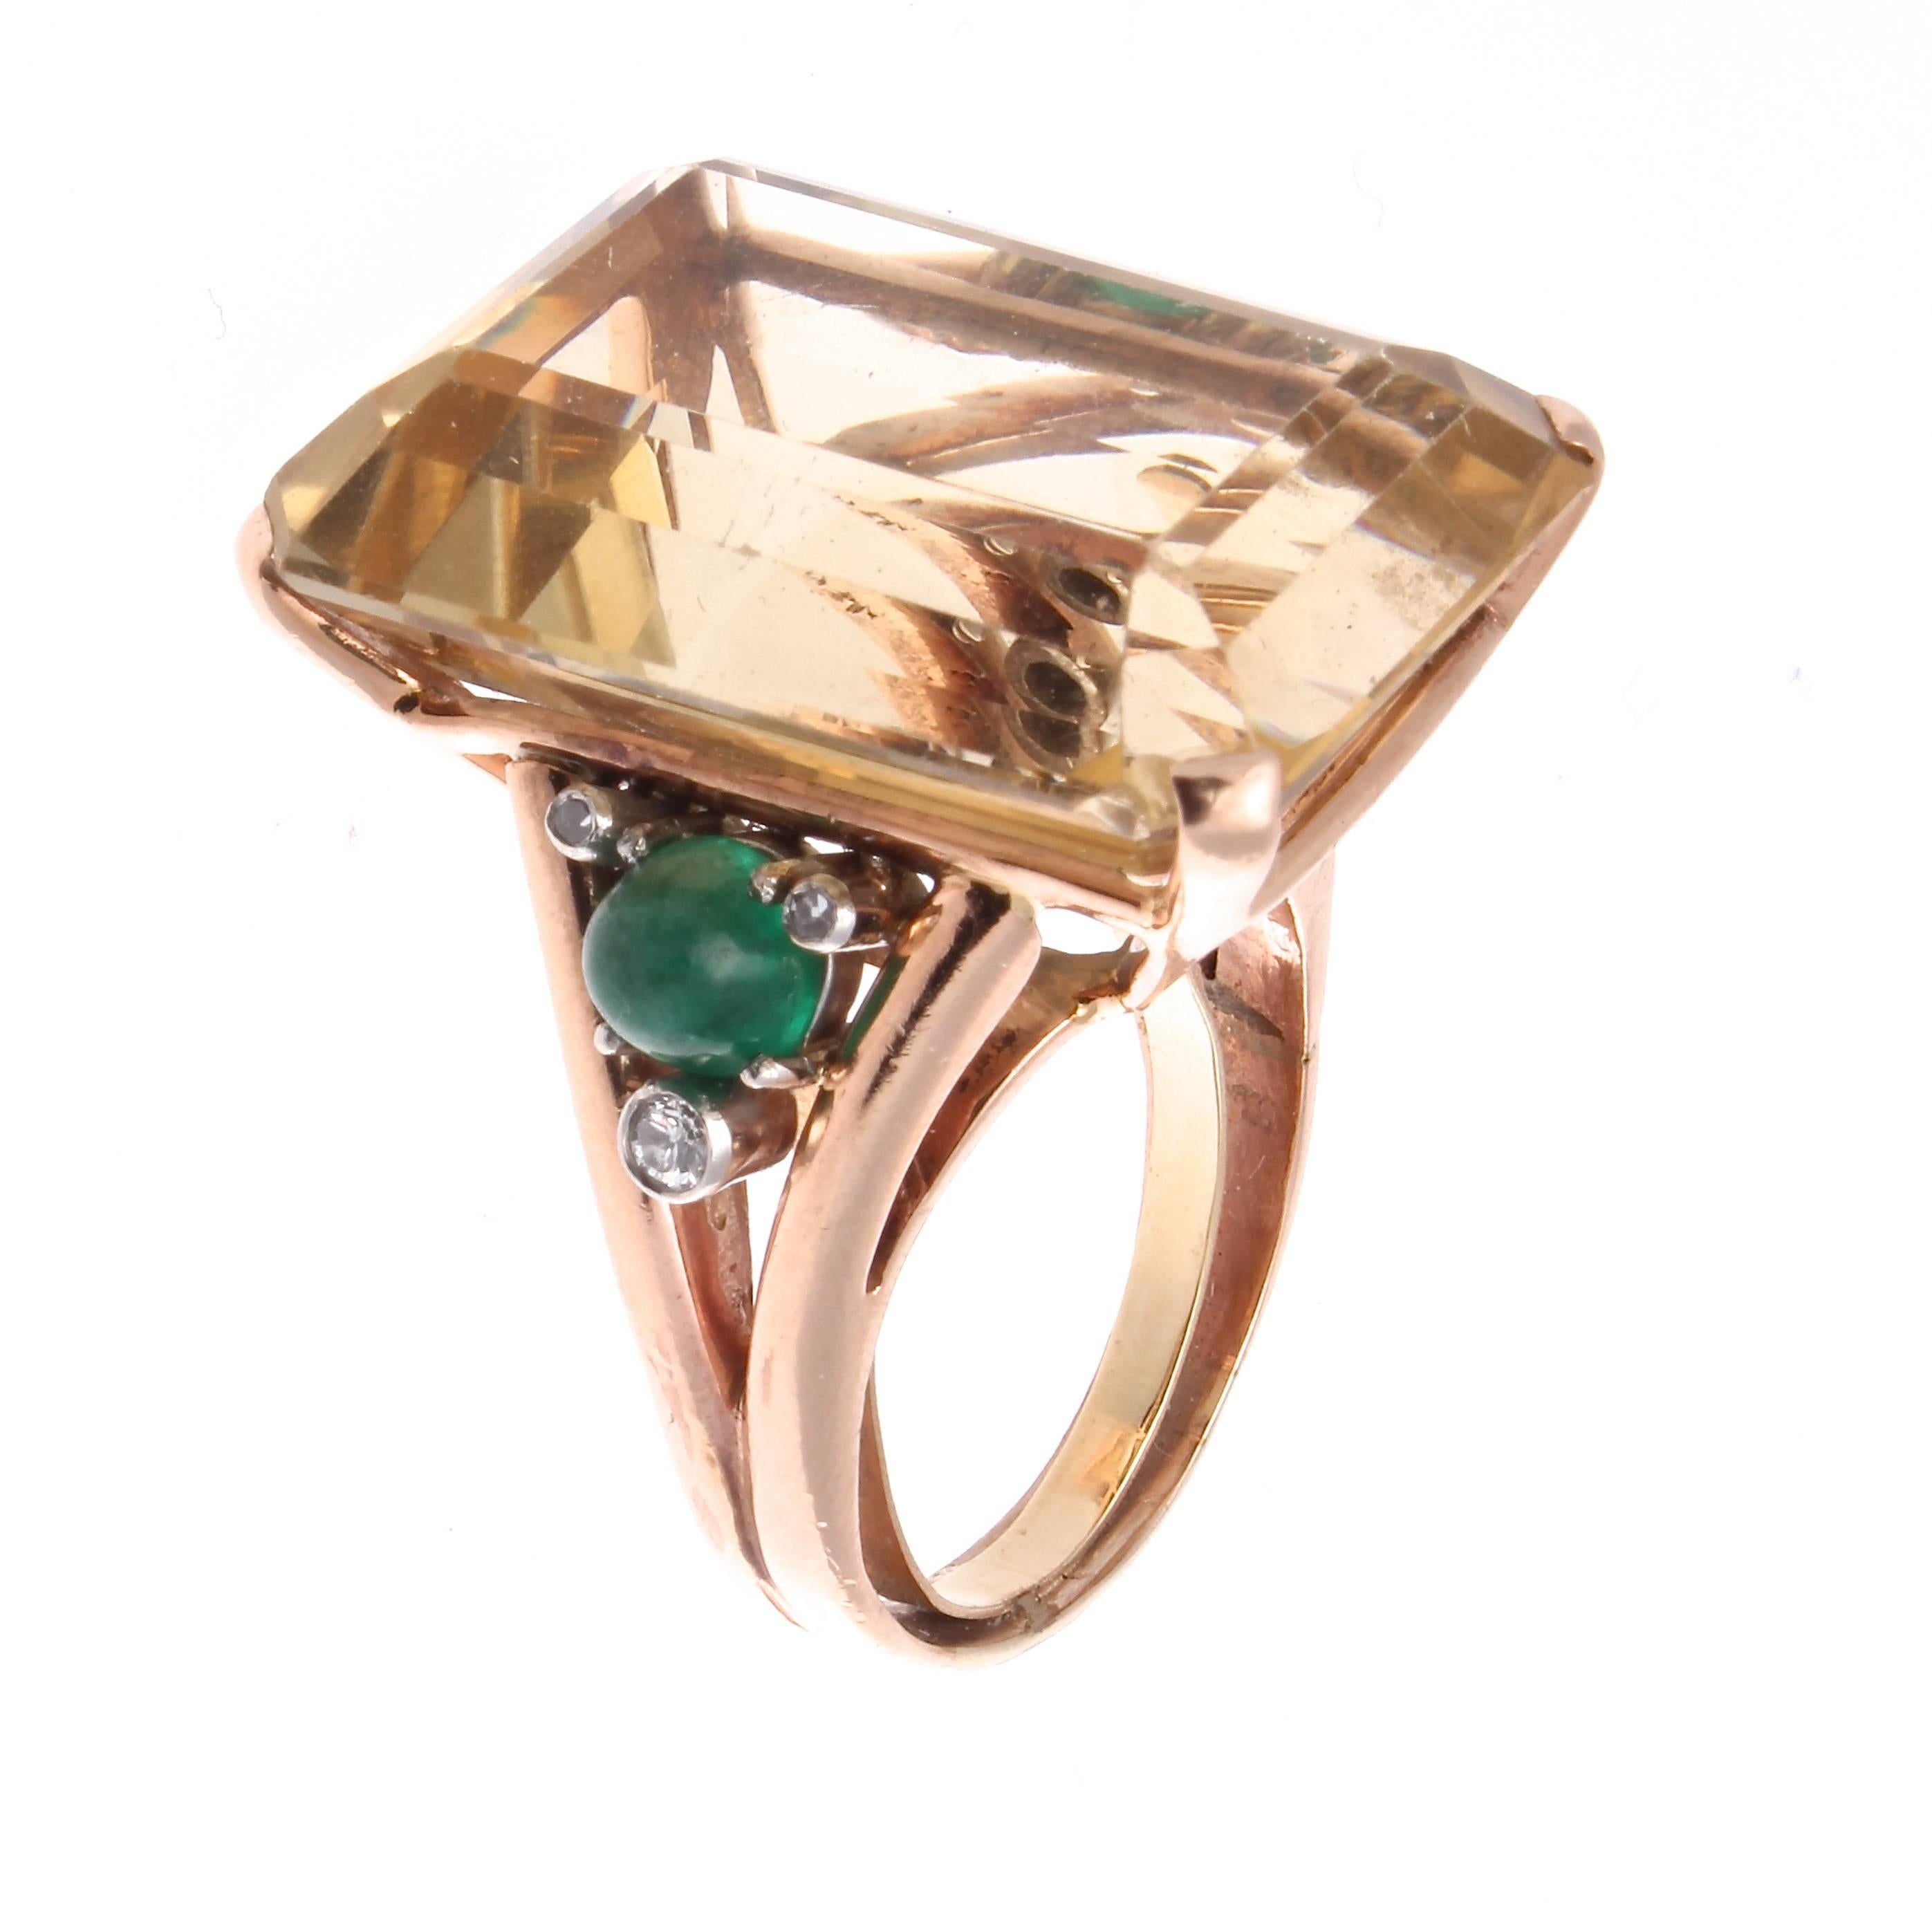 The 1940's was an era where bigger was better. The large glowing golden citrine is been accented by a lovely cabochon emerald that is surrounded by 3 white, clean diamonds on either side. Hand crafted in a 14k rose gold ring,  a popular style in